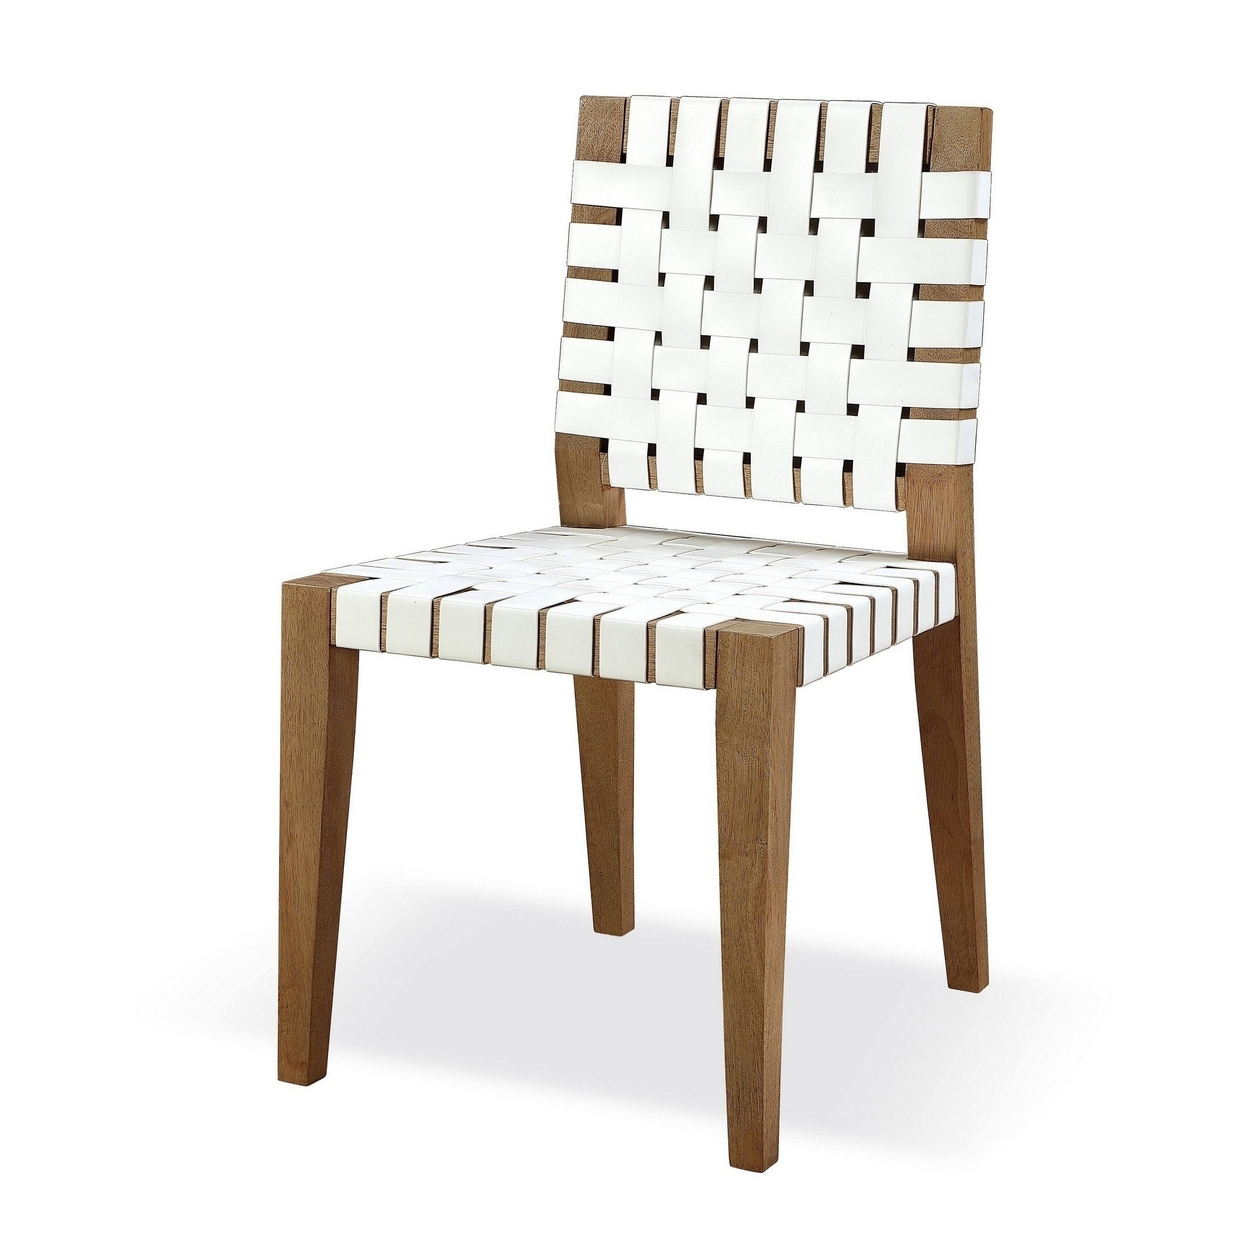 Rux 19 Inch Dining Chair, Woven Faux Leather Seat, White, Brown Wood -Saltoro Sherpi